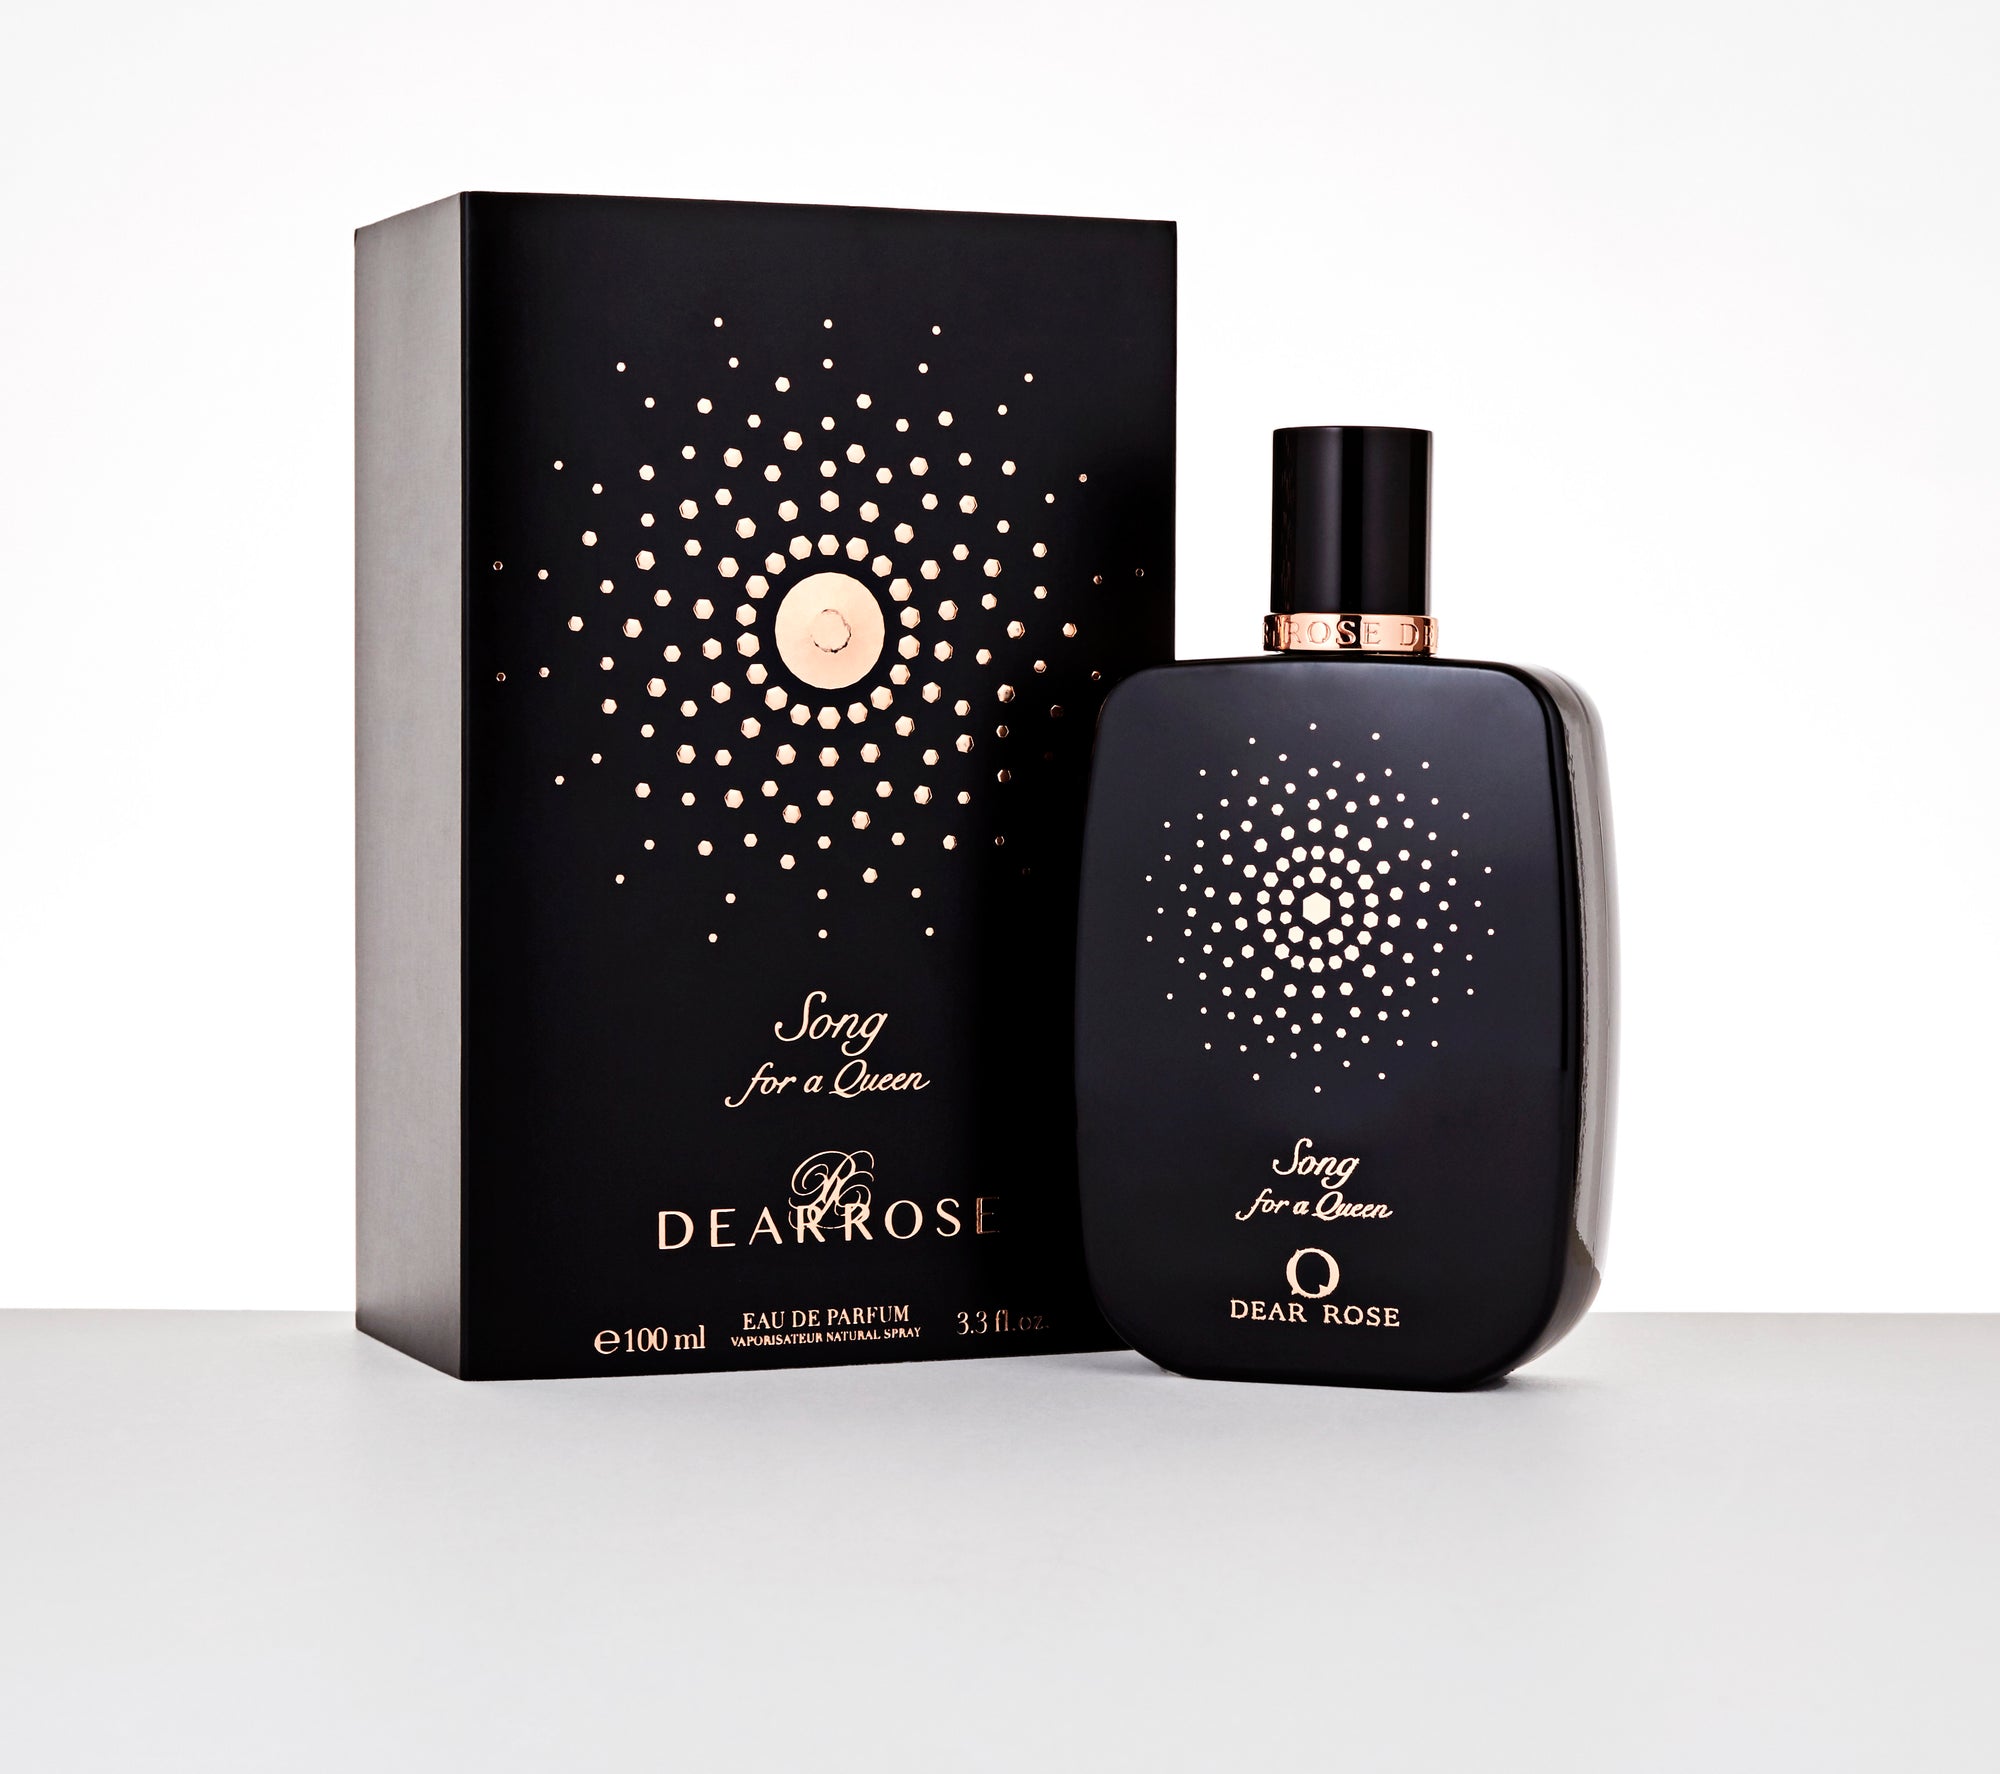 Dear Rose Perfume "Song For A Queen", France perfume